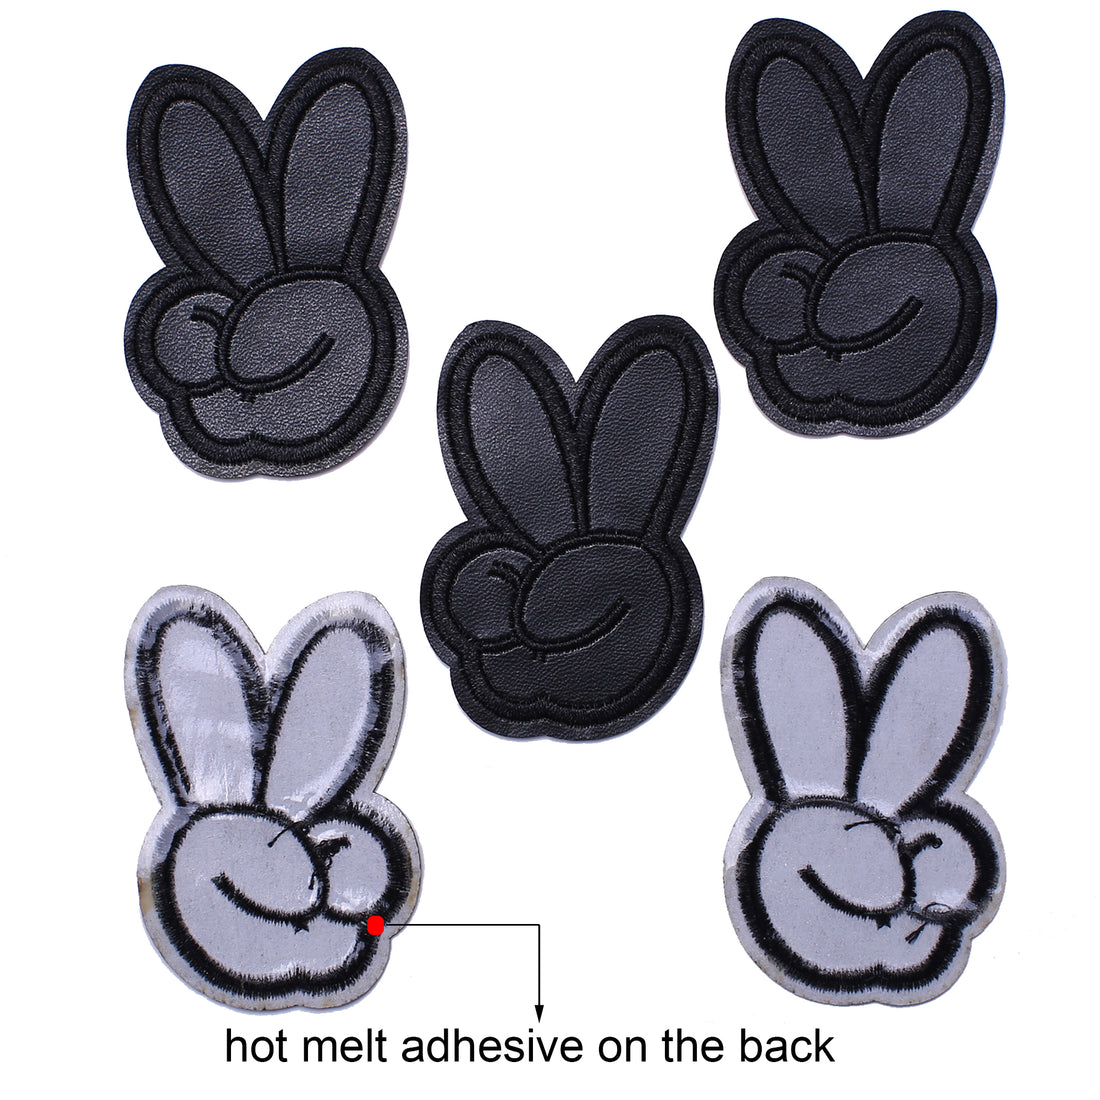 5Pcs Two Fingers Peace Victory Sign Embroidered Iron on Patch for Clothes, Iron-on Patches / Sew-on Appliques Patches for Clothing, Jackets, Backpacks, Caps, Jeans